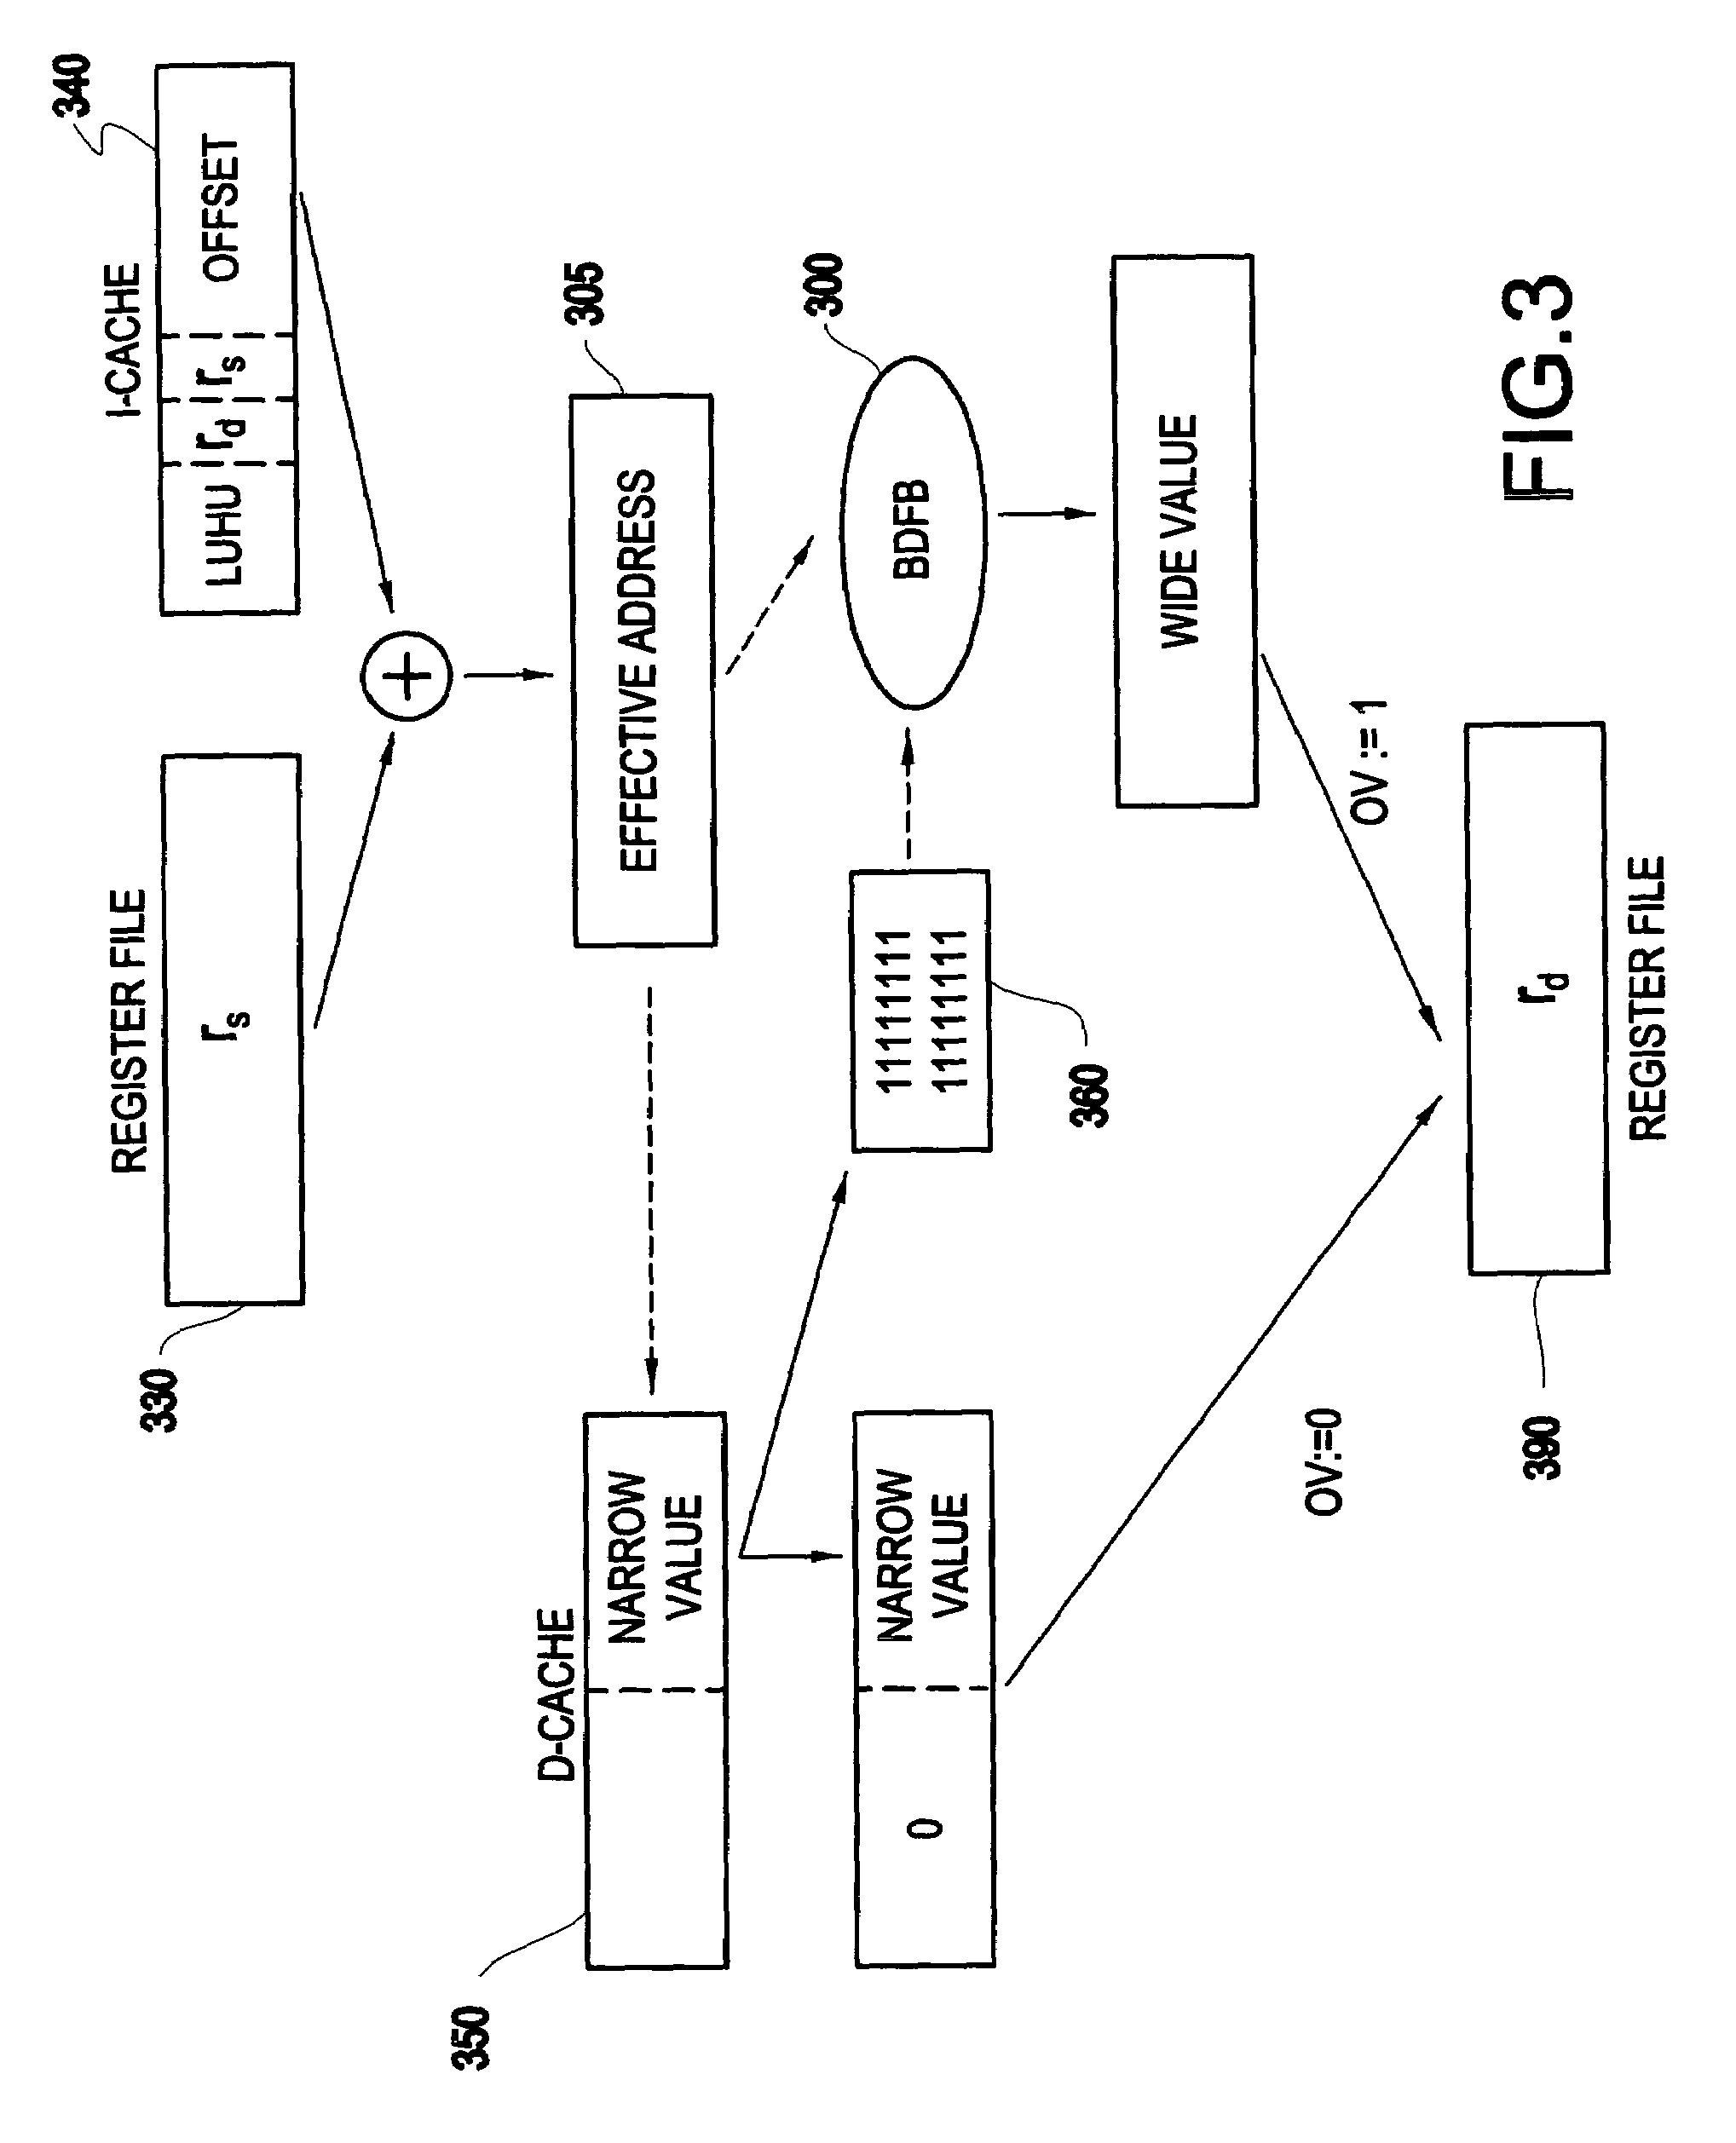 System and method for managing data